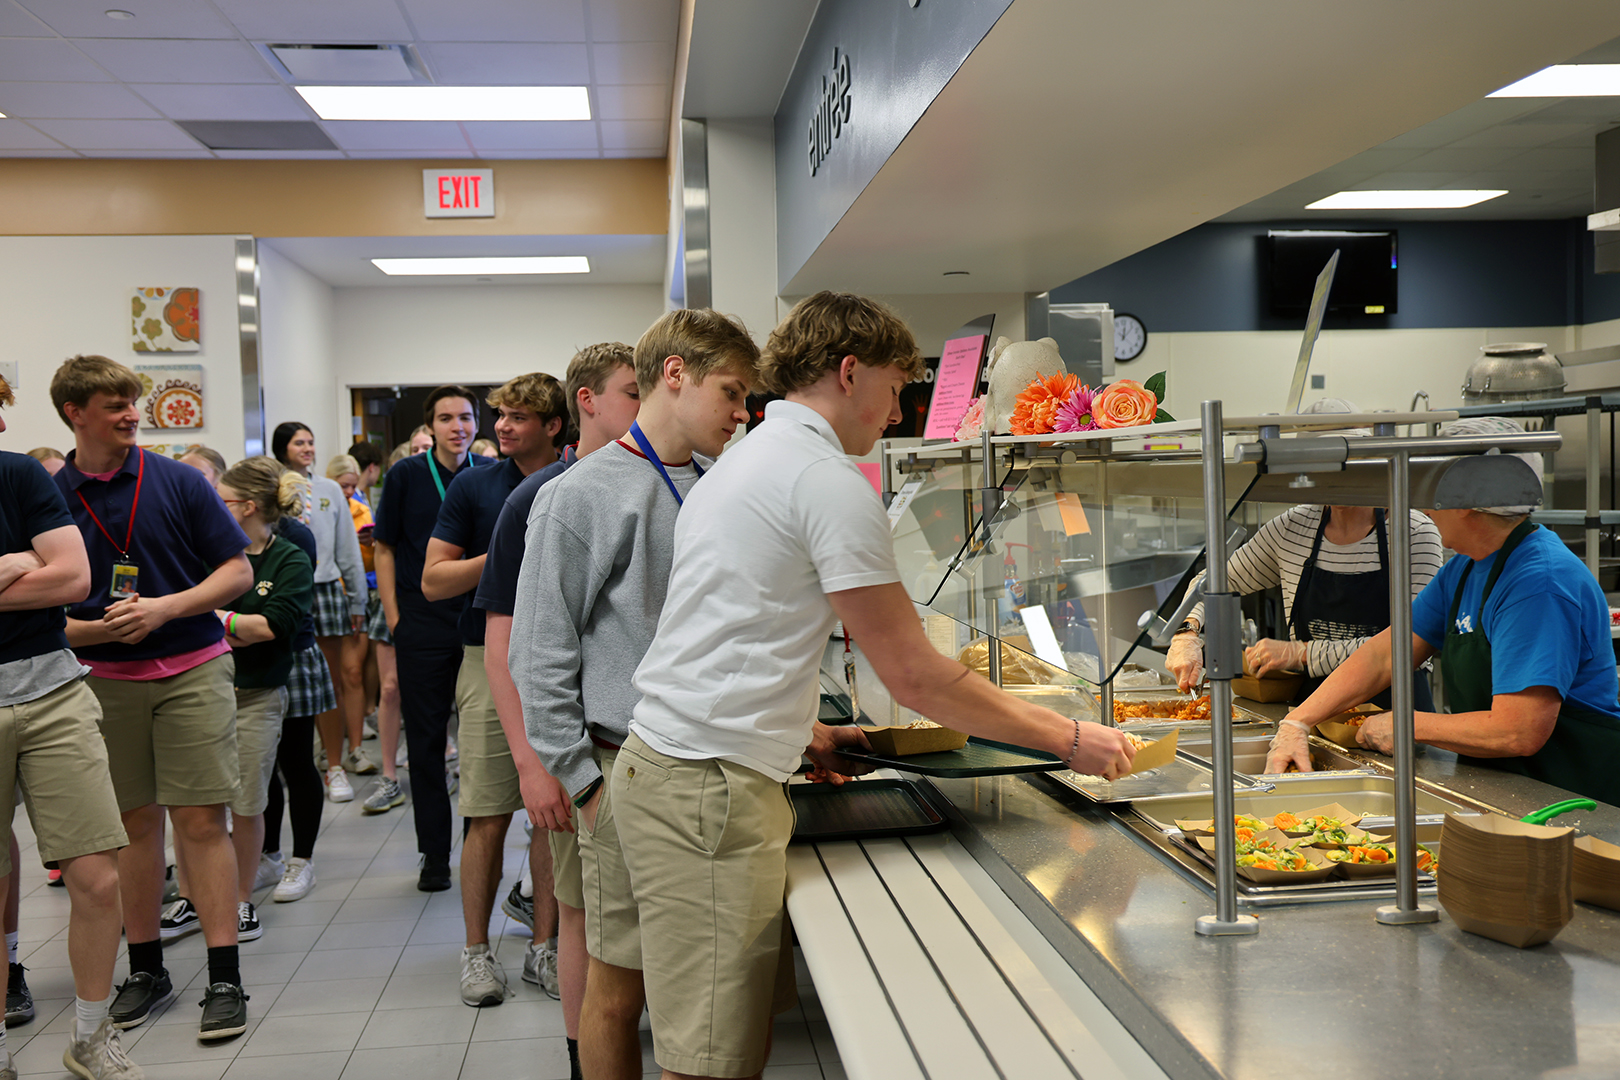 Students receive school lunch at Pius X High School in Lincoln, Neb.